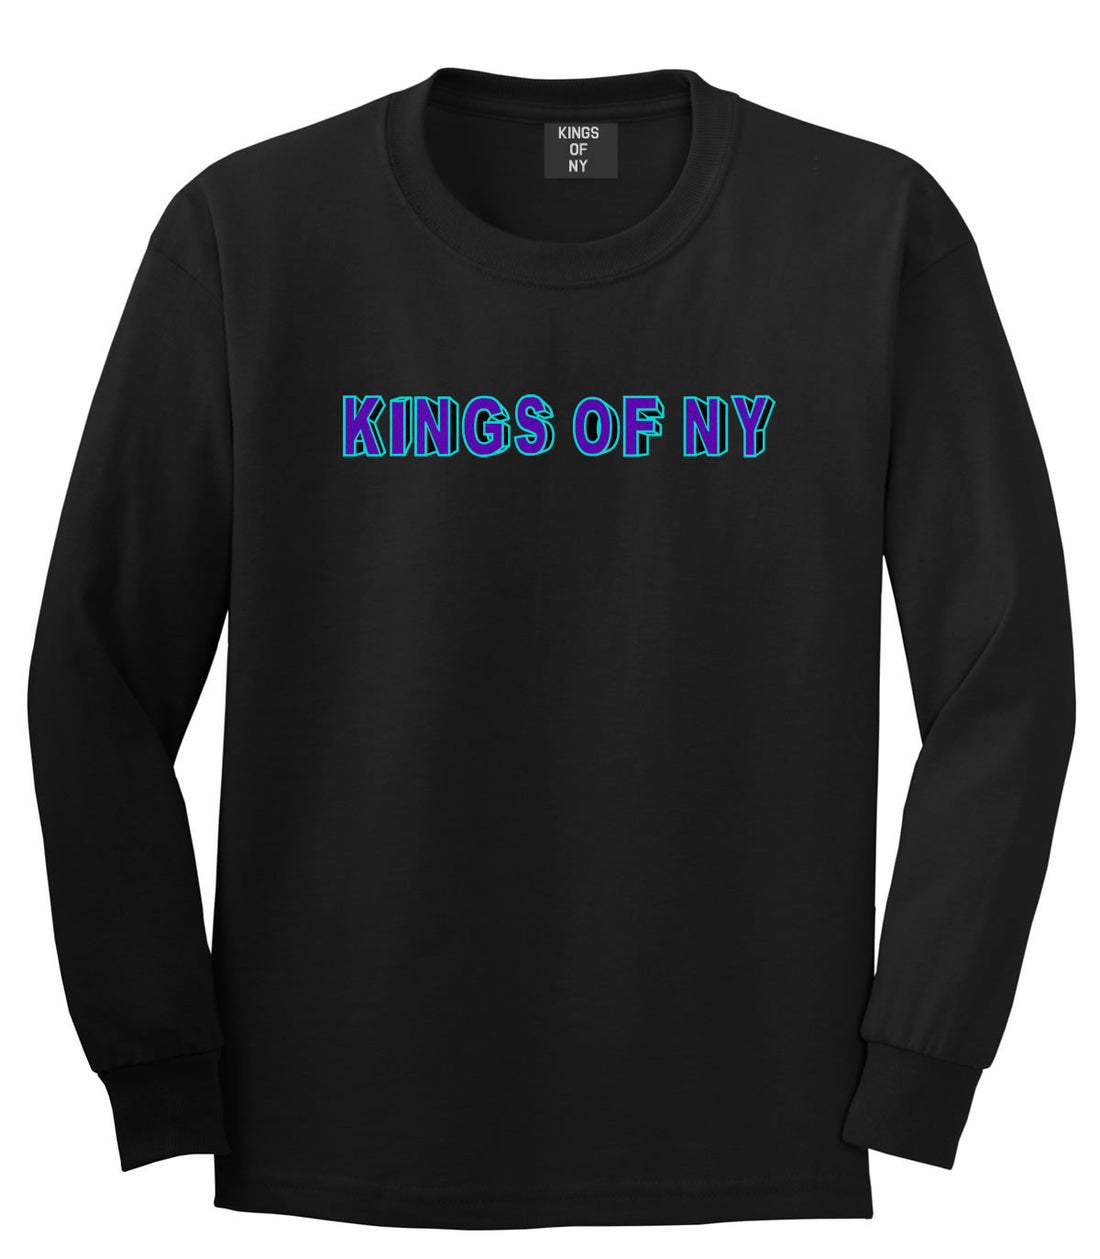 Bright Block Letters Boys Kids Long Sleeve T-Shirt in Black by Kings Of NY